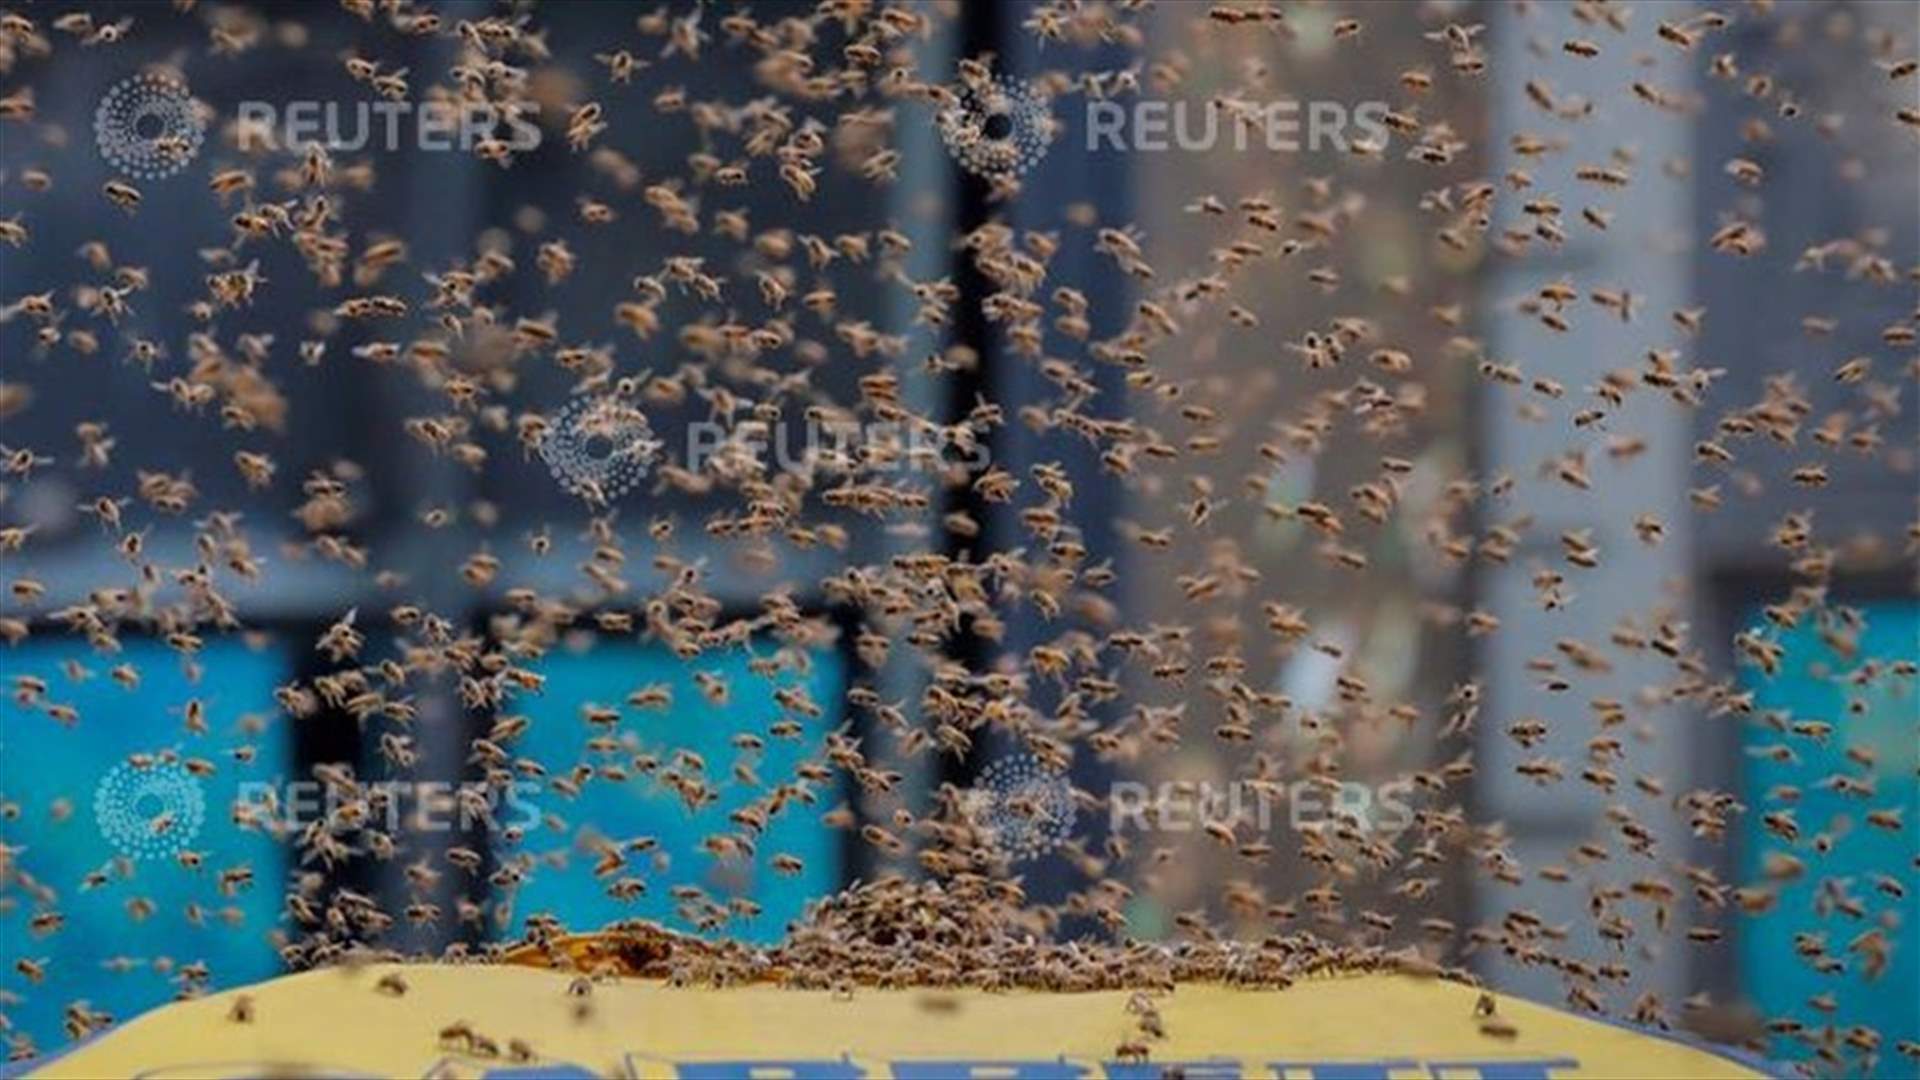 Bees besiege Times Square street, drawing swarm of tourists - PHOTOS